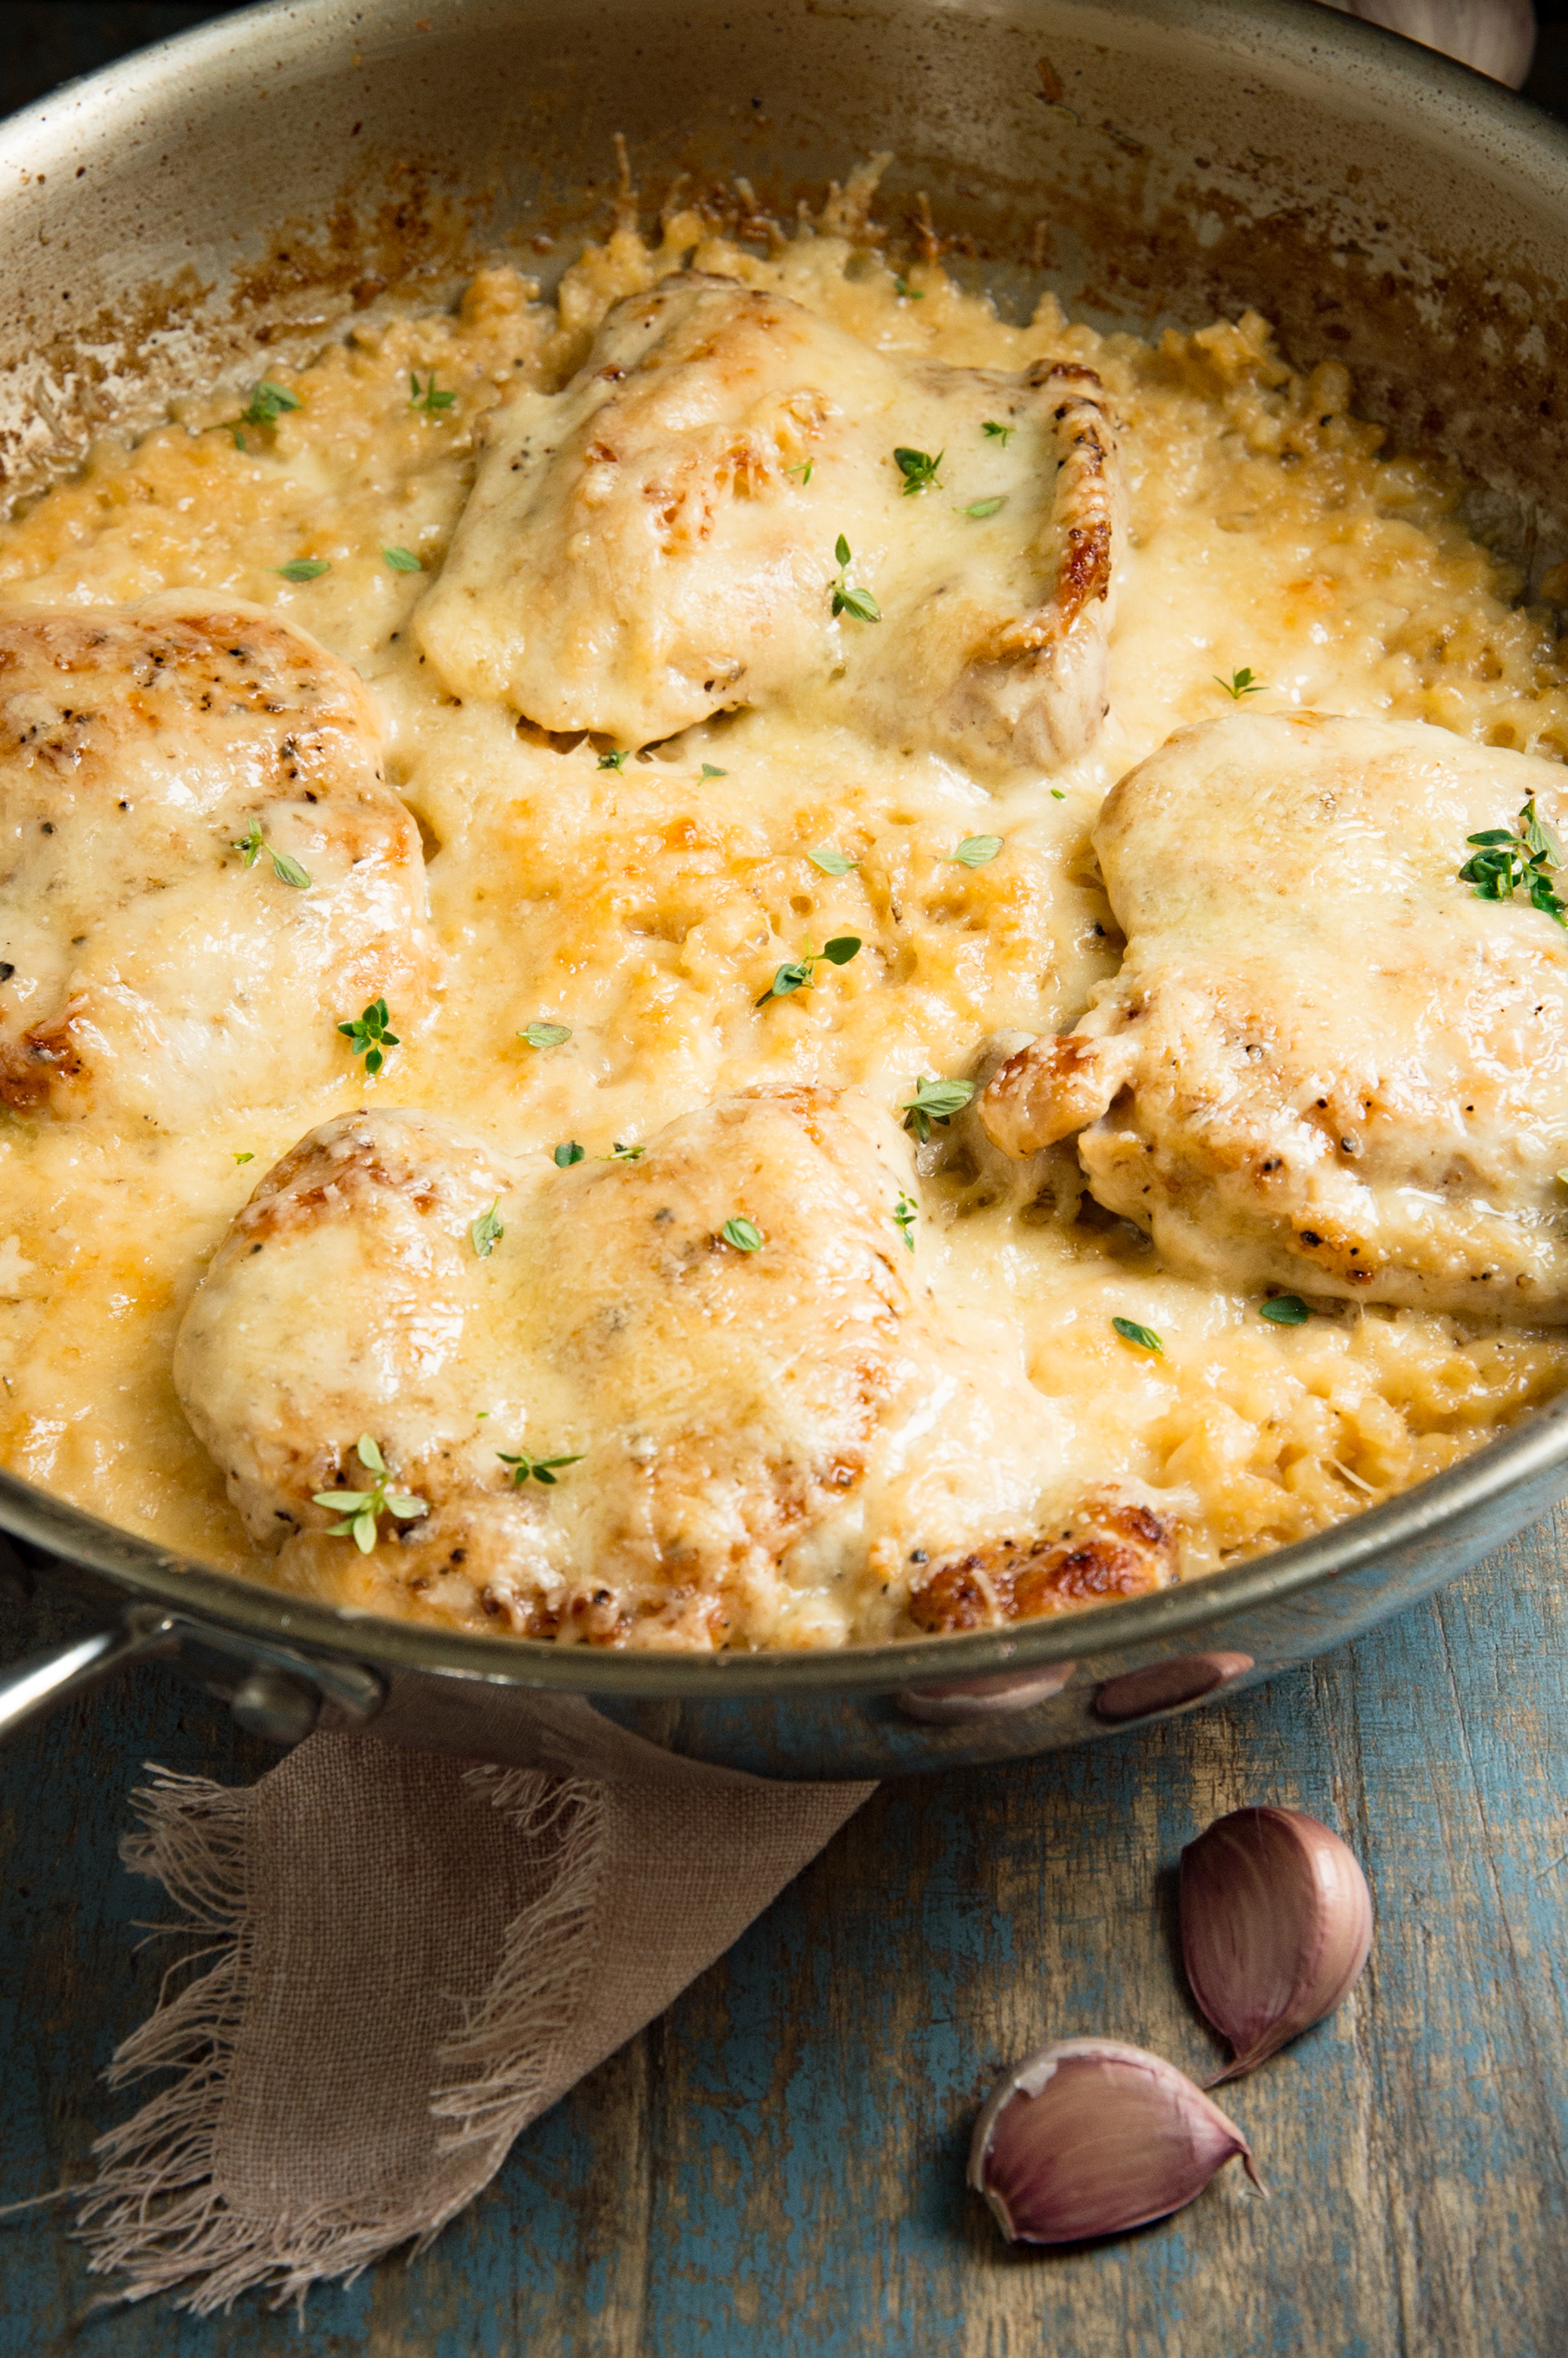 Low-Carb One Skillet Creamy Garlic Parmesan Chicken-In the pan.